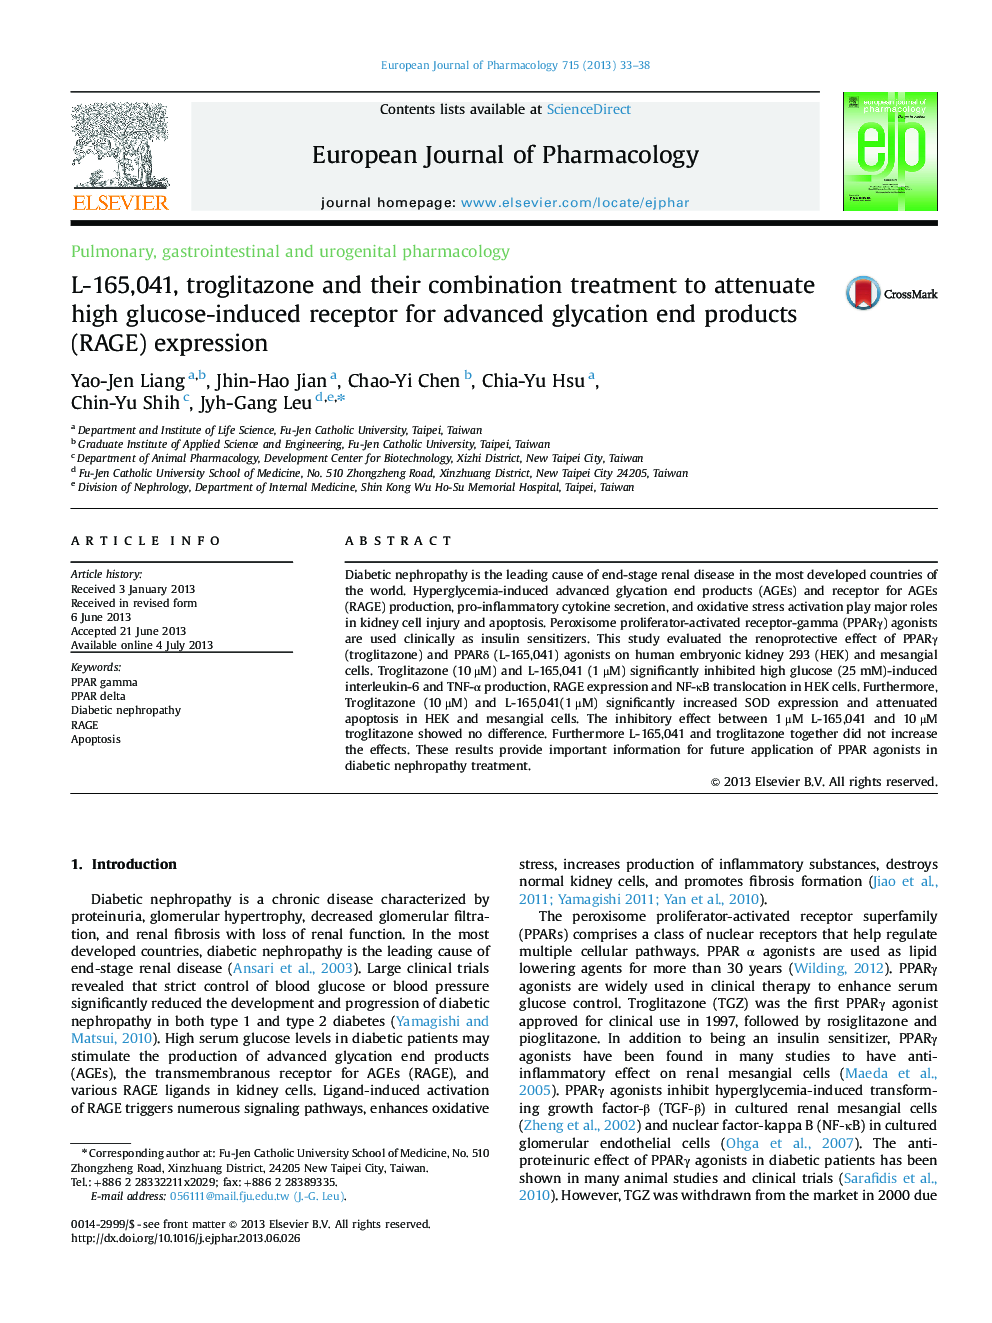 L-165,041, troglitazone and their combination treatment to attenuate high glucose-induced receptor for advanced glycation end products (RAGE) expression